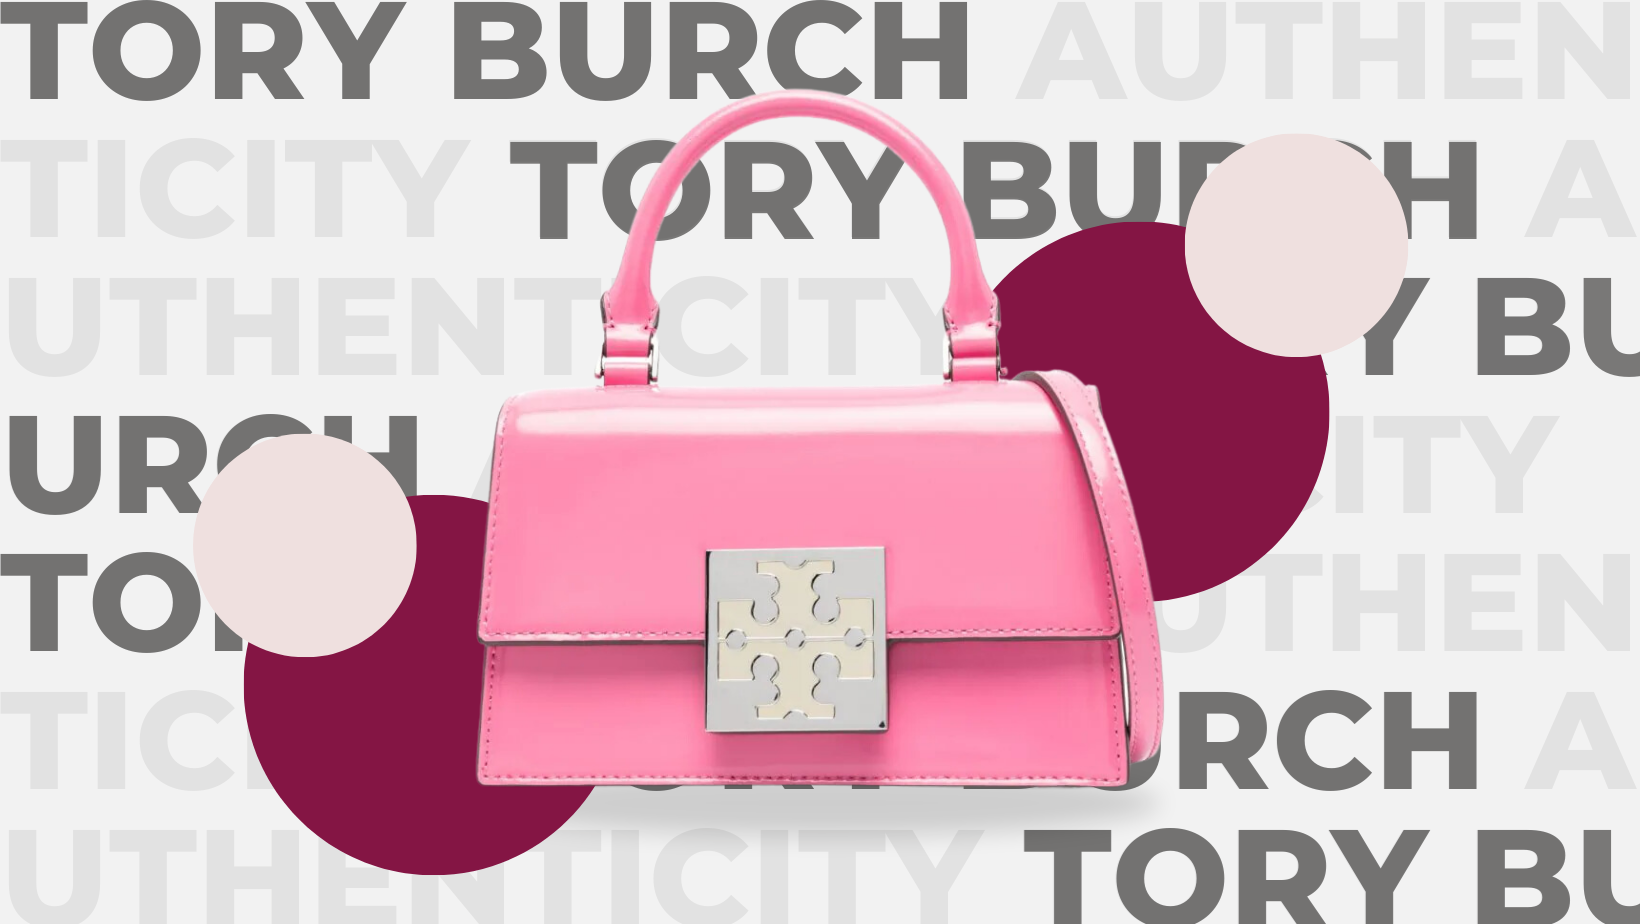 Don't Get Scammed! How to Identify Genuine Tory Burch Handbags 